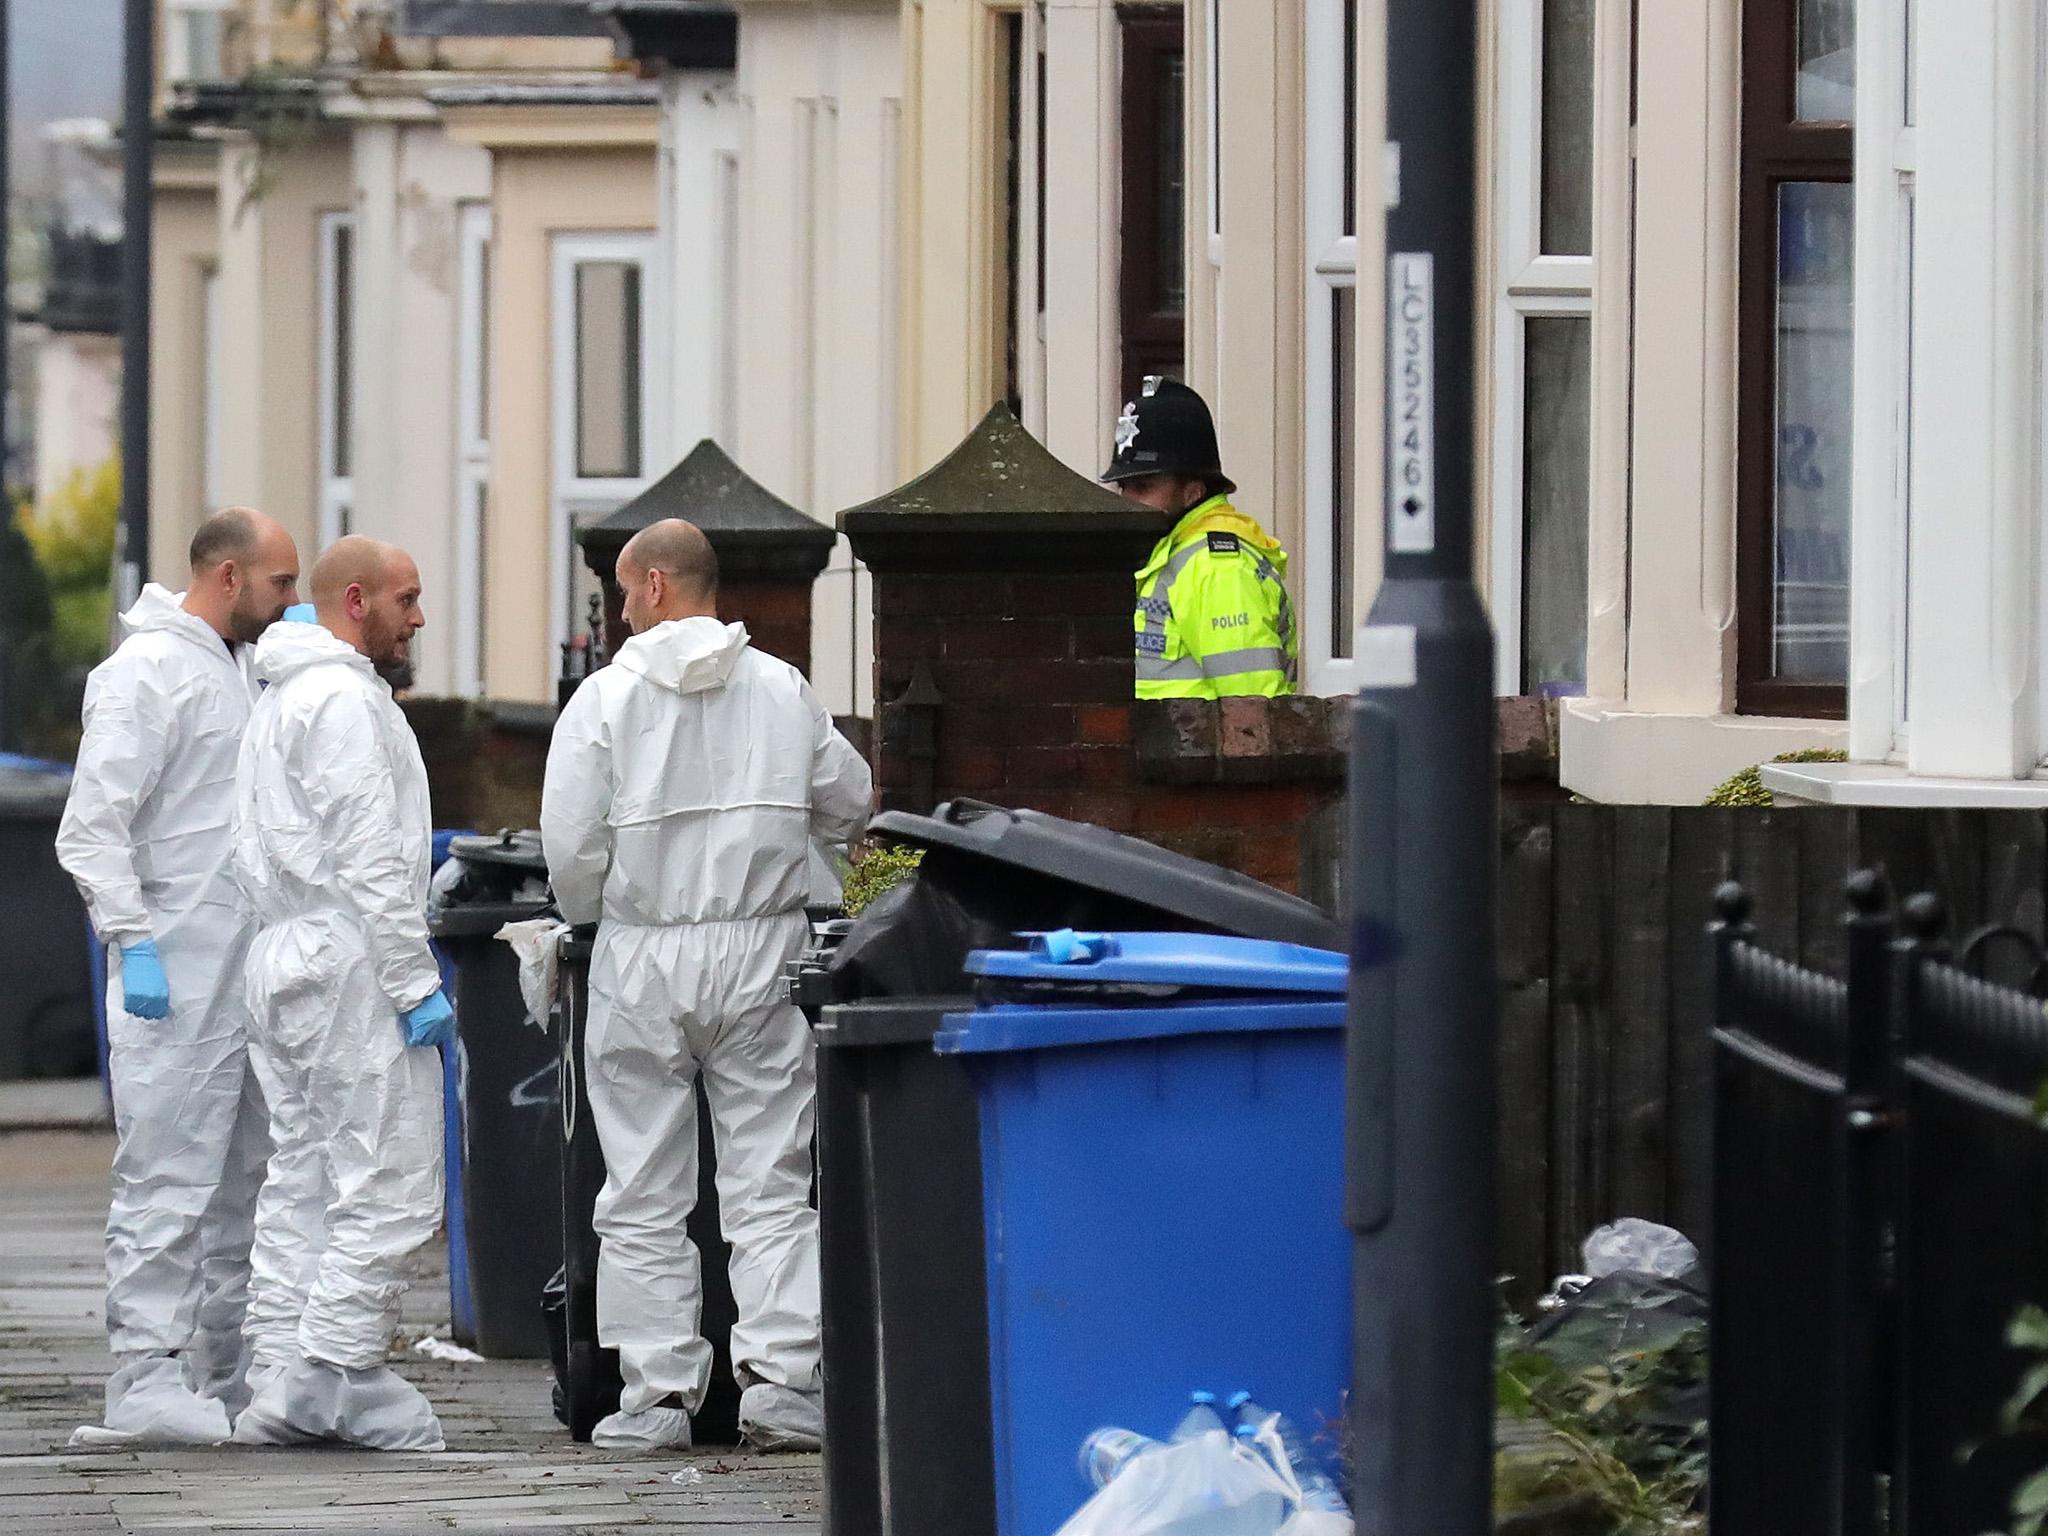 Forensics officers collect evidence at a house in Derby last week after the arest of four men in the city. Two were subsequently released without charge